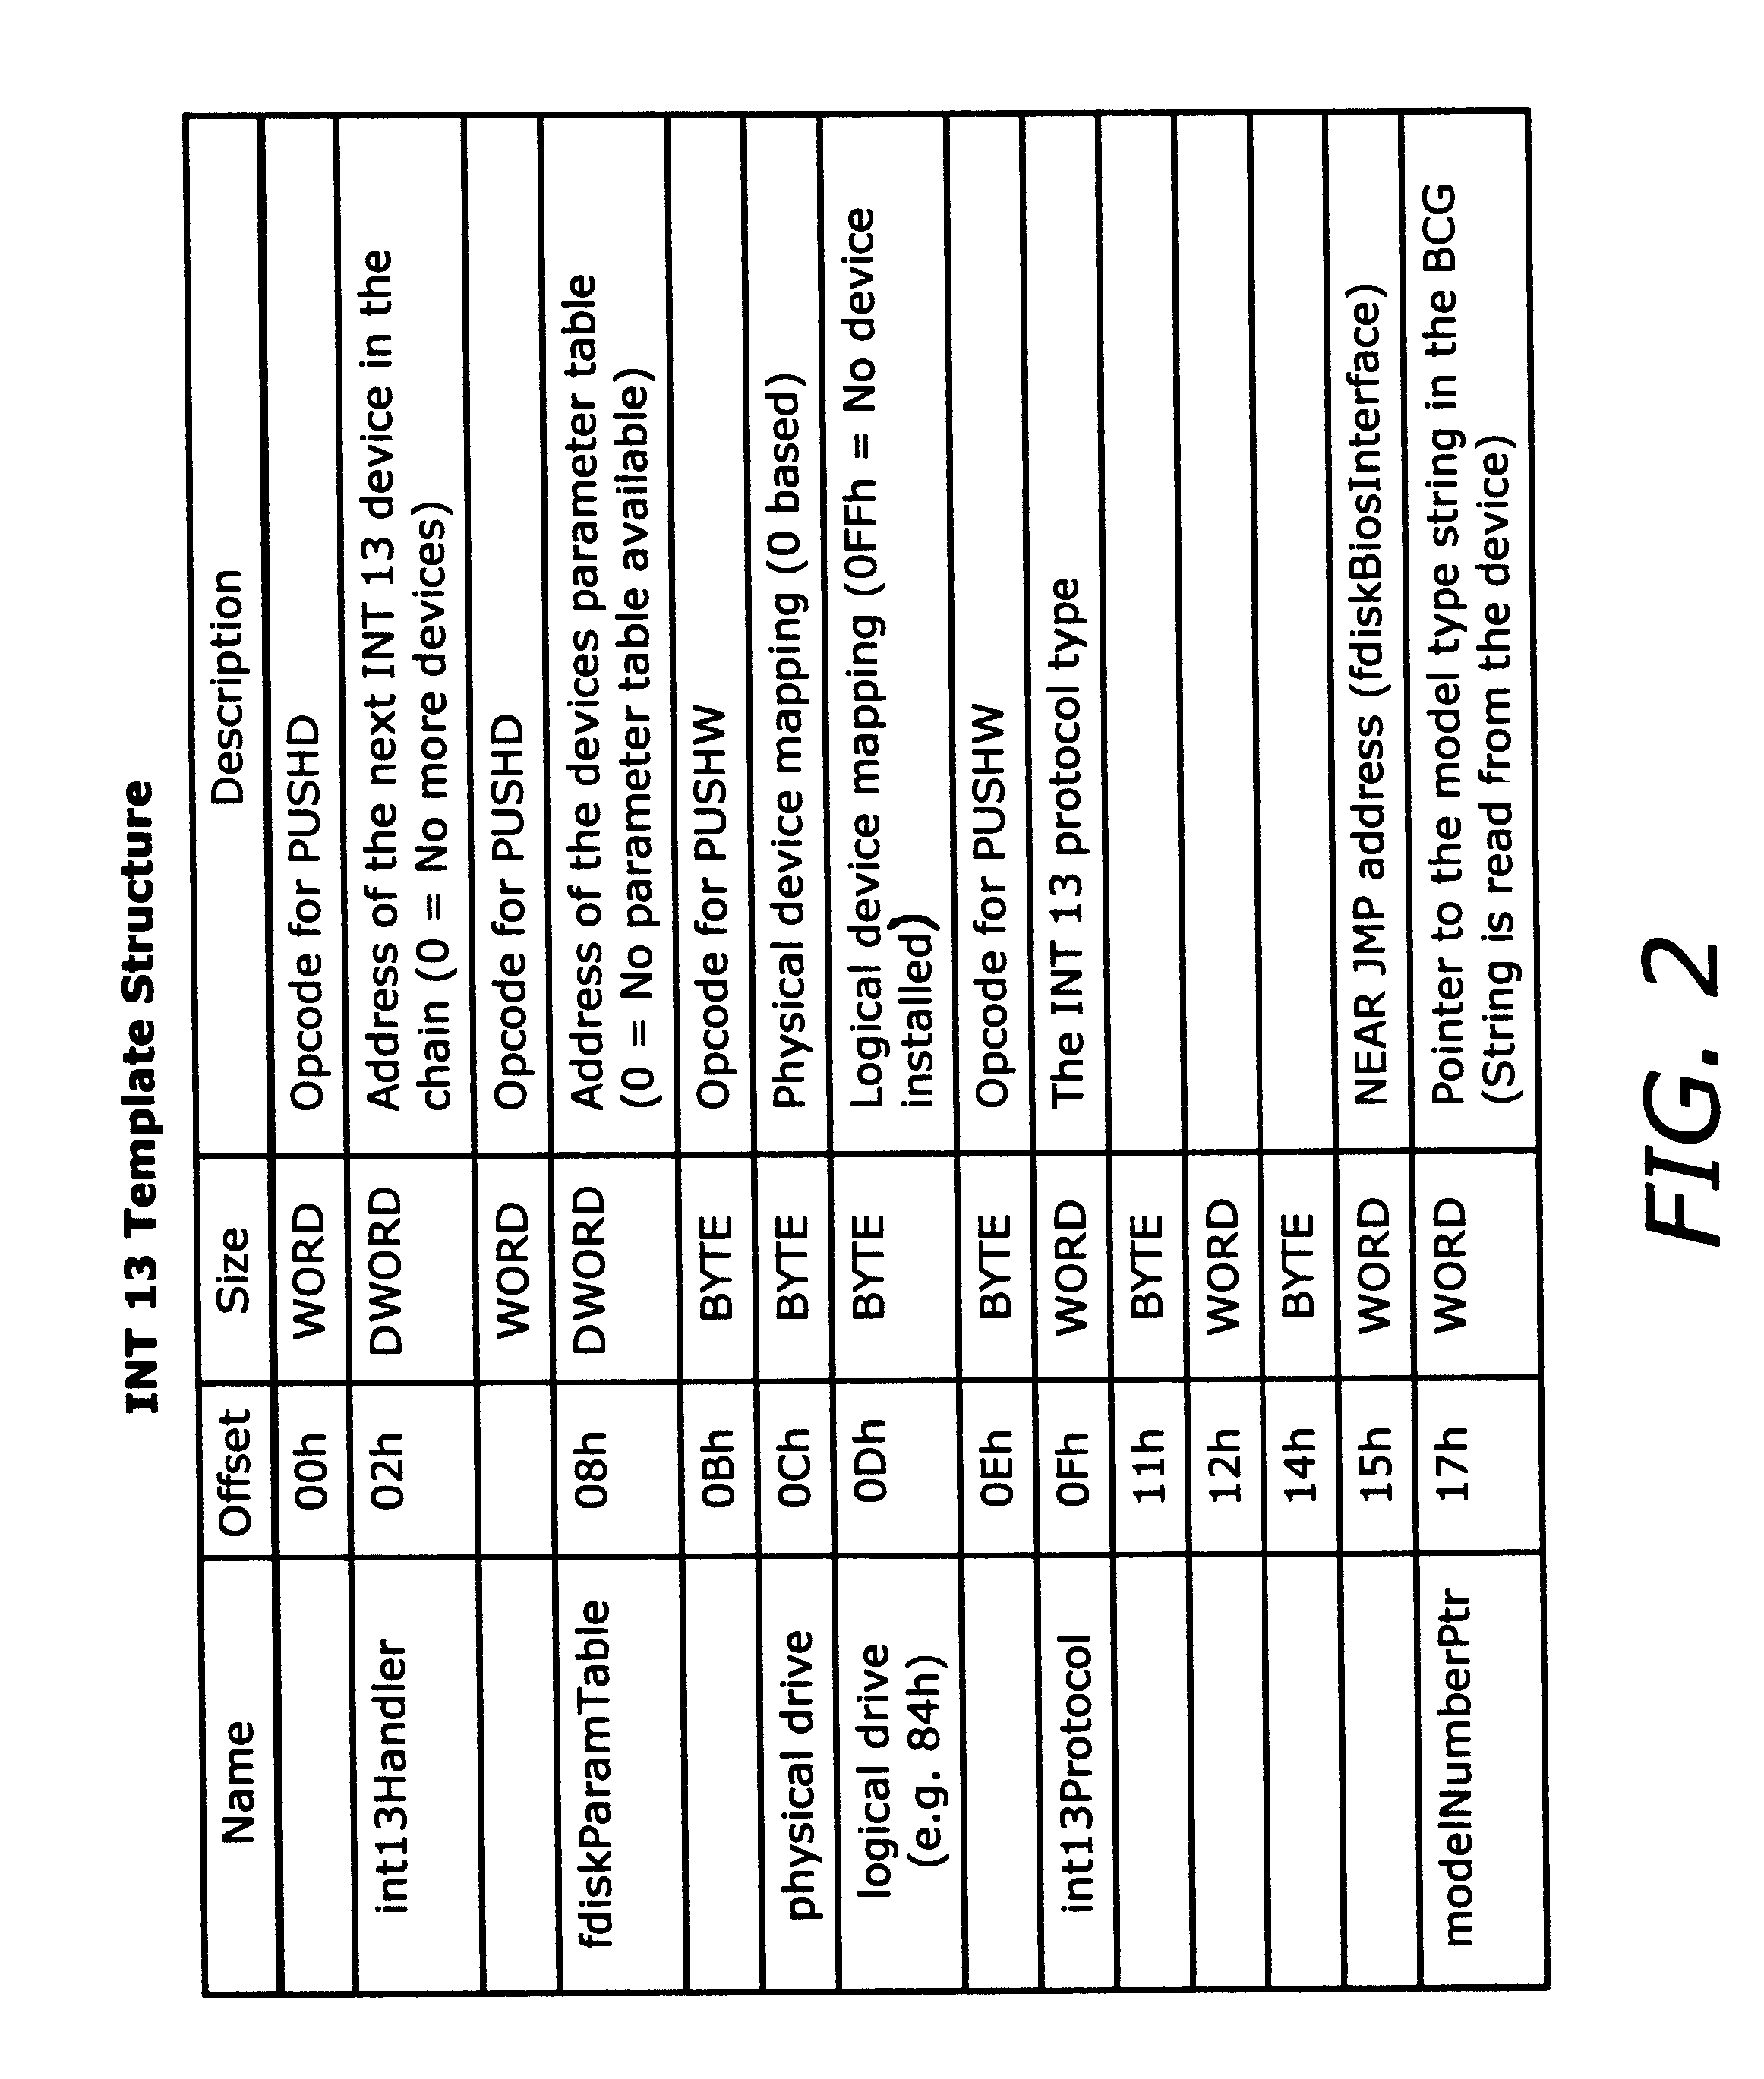 System for reconfiguring a boot device by swapping the logical device number of a user selected boot drive to a currently configured boot drive